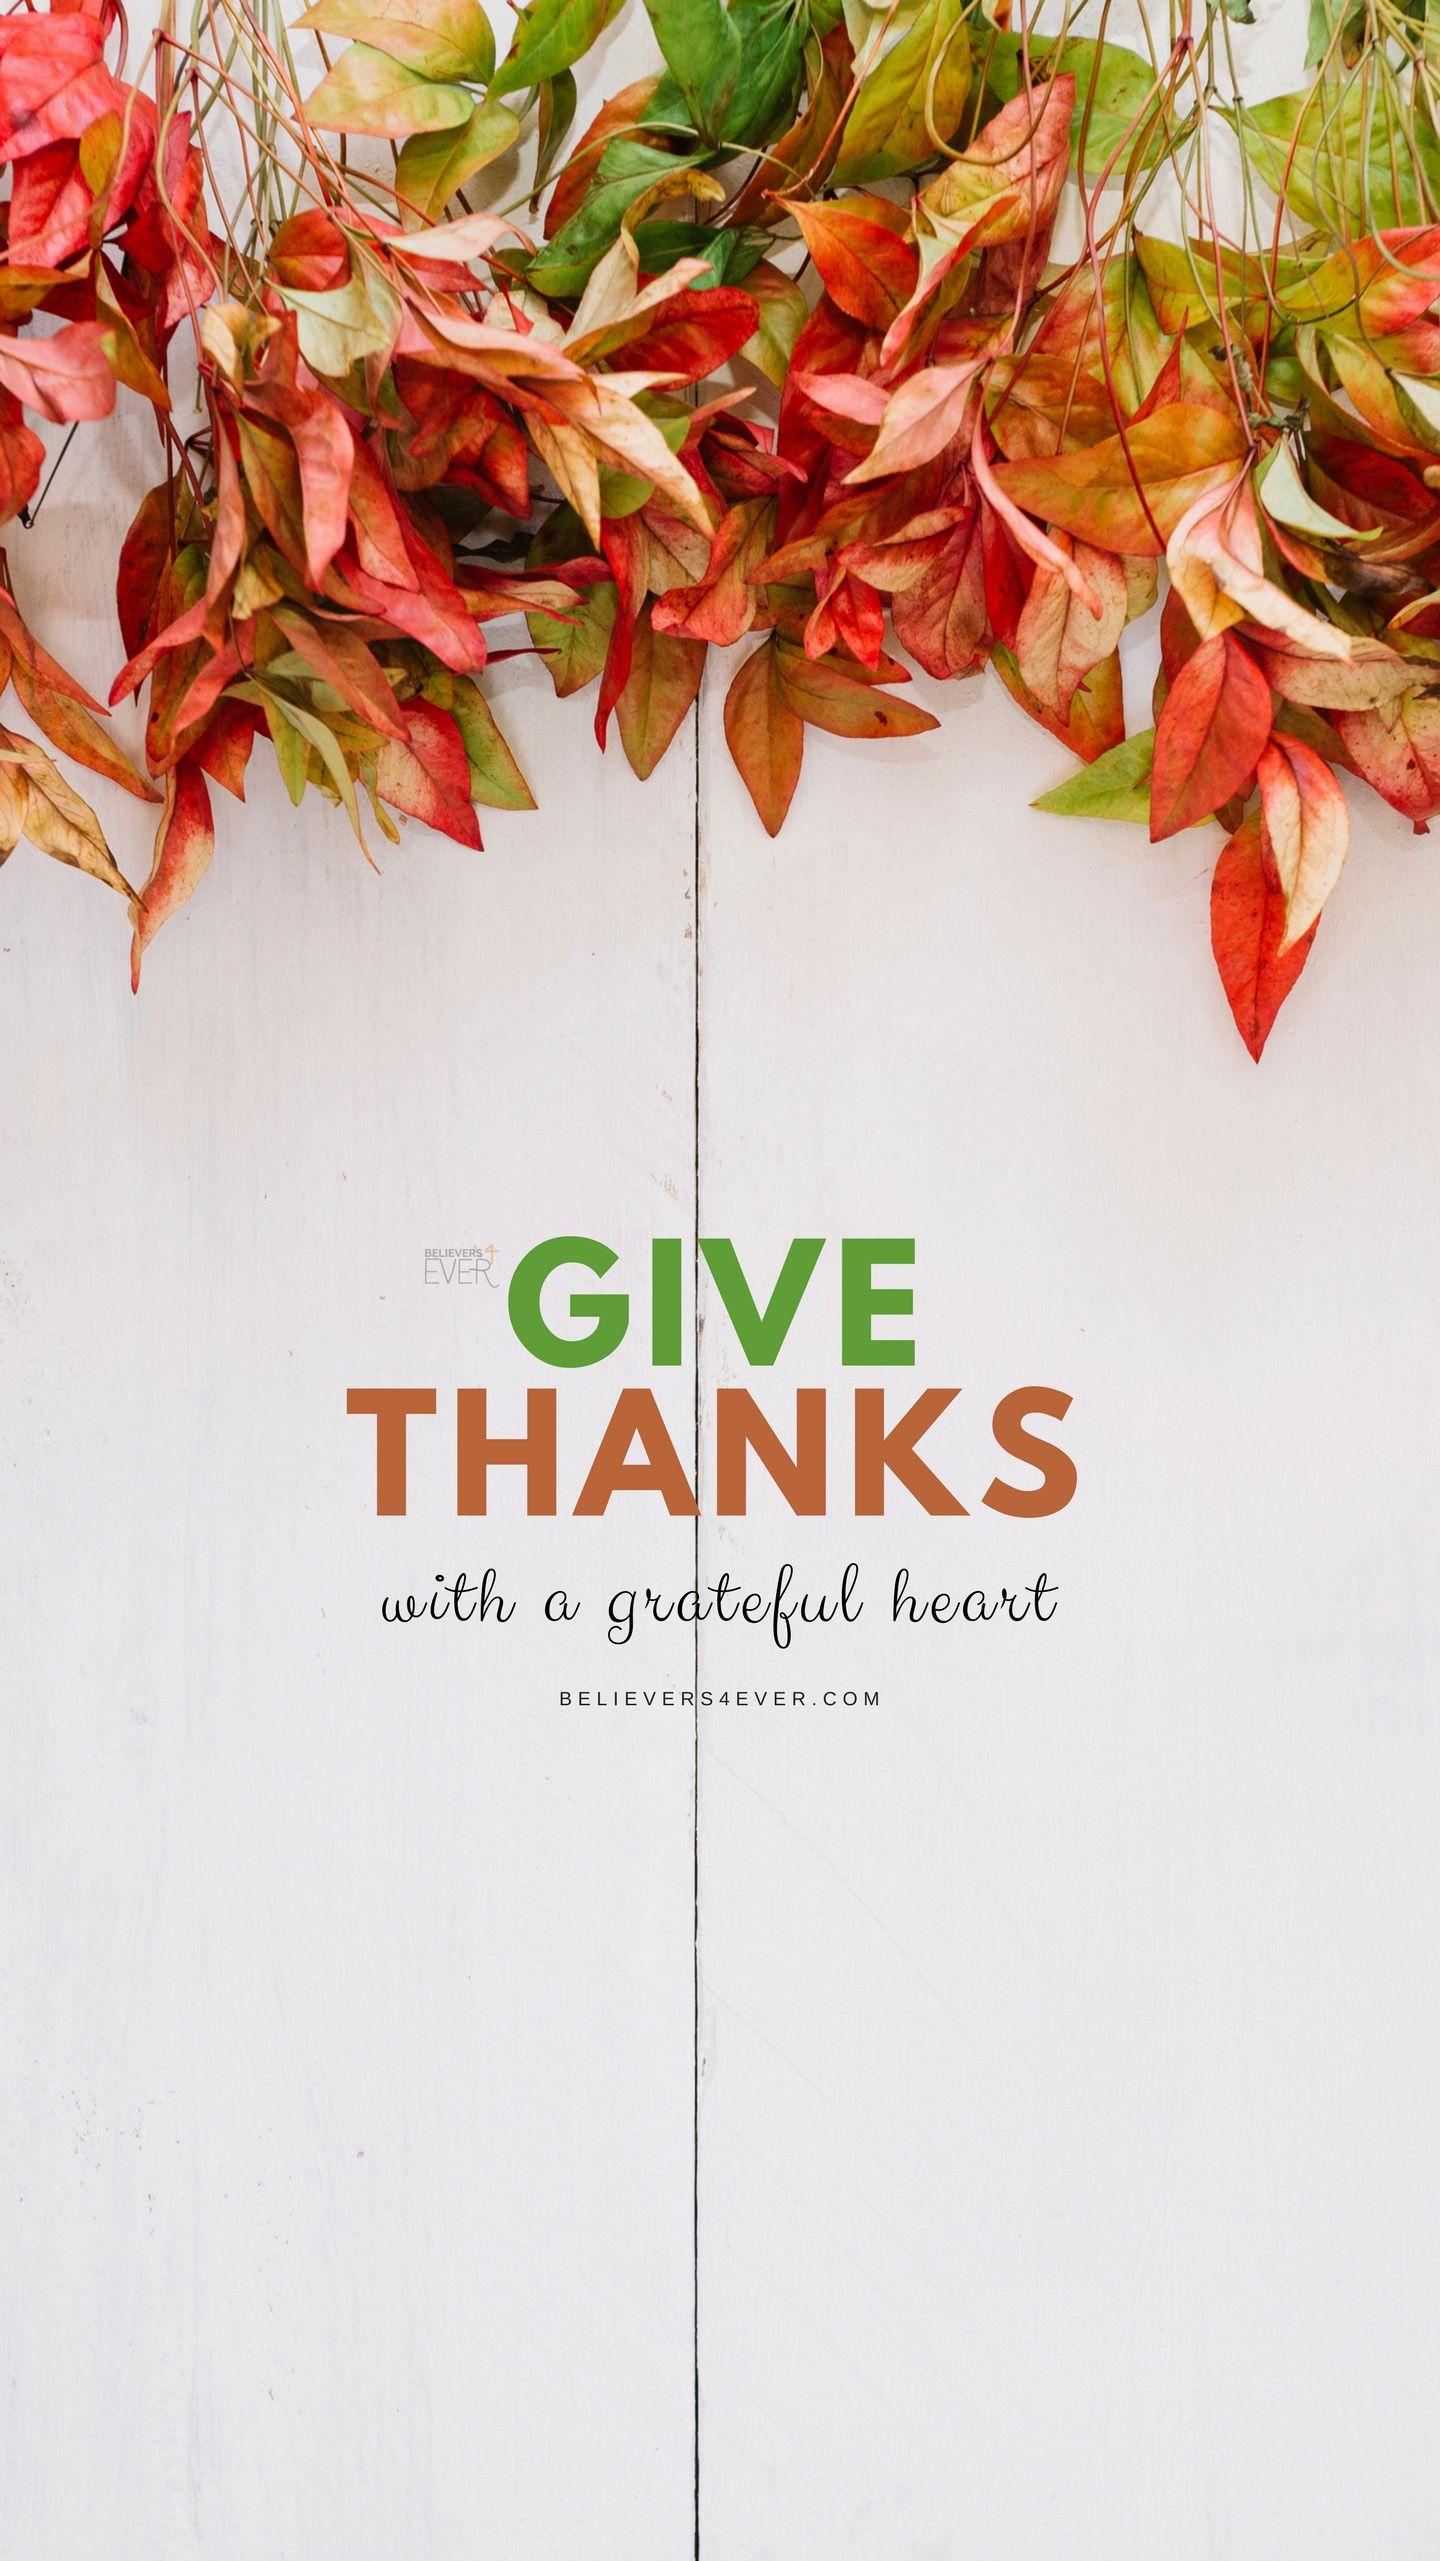 Give Thanks 1 440×2 561 пикс. IPhone Wallpaper